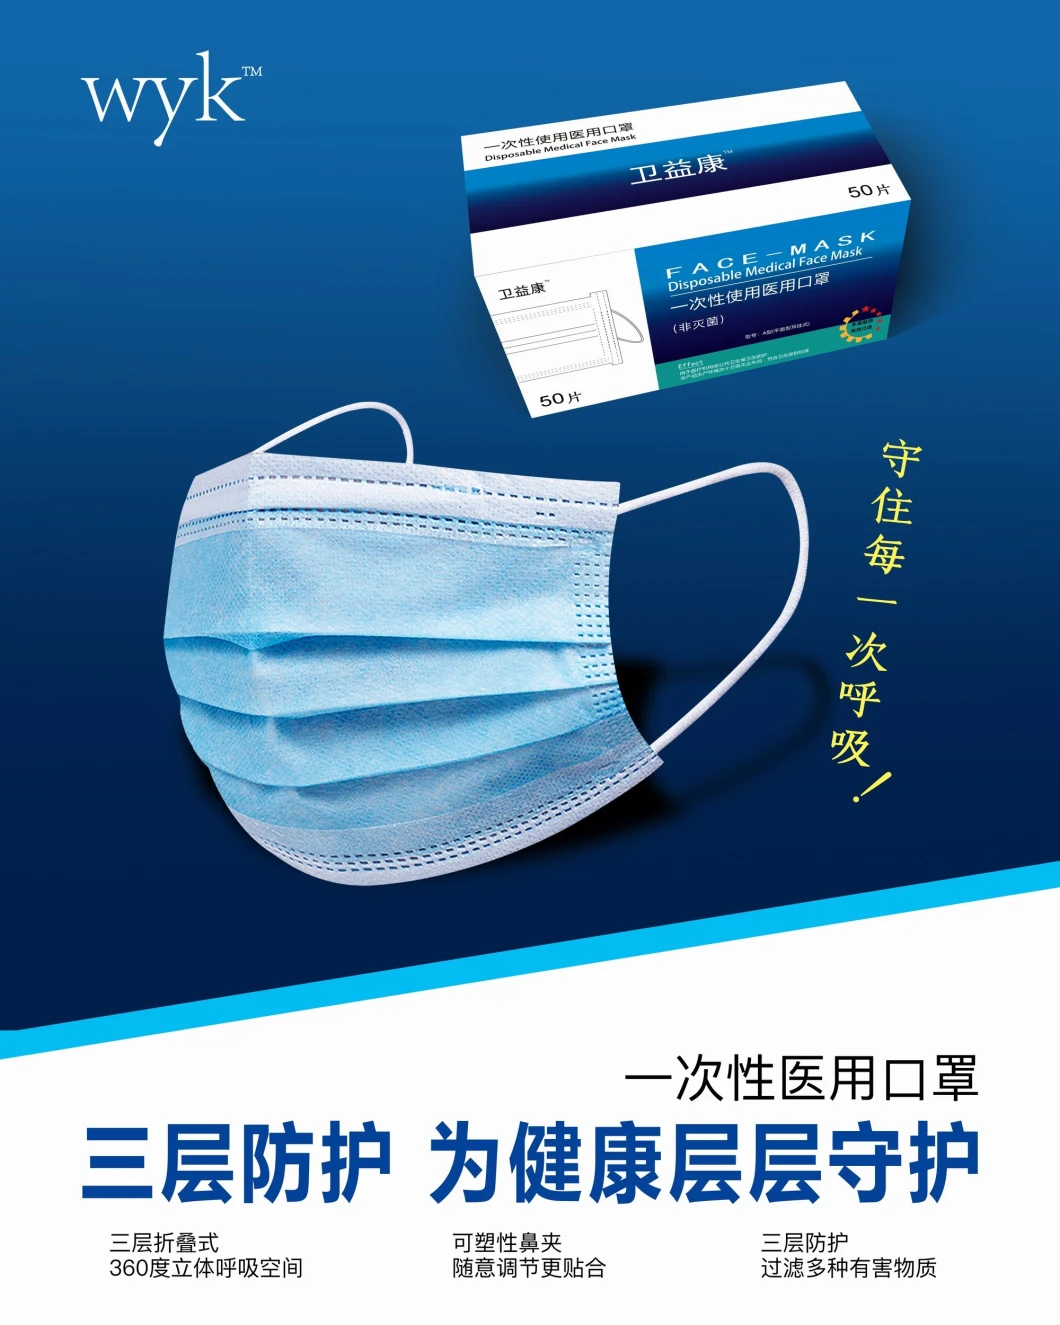 Use Material PP Cloth + Melt Blown Cloth to Produce Disposable PP Non Woven 3ply Face Mask